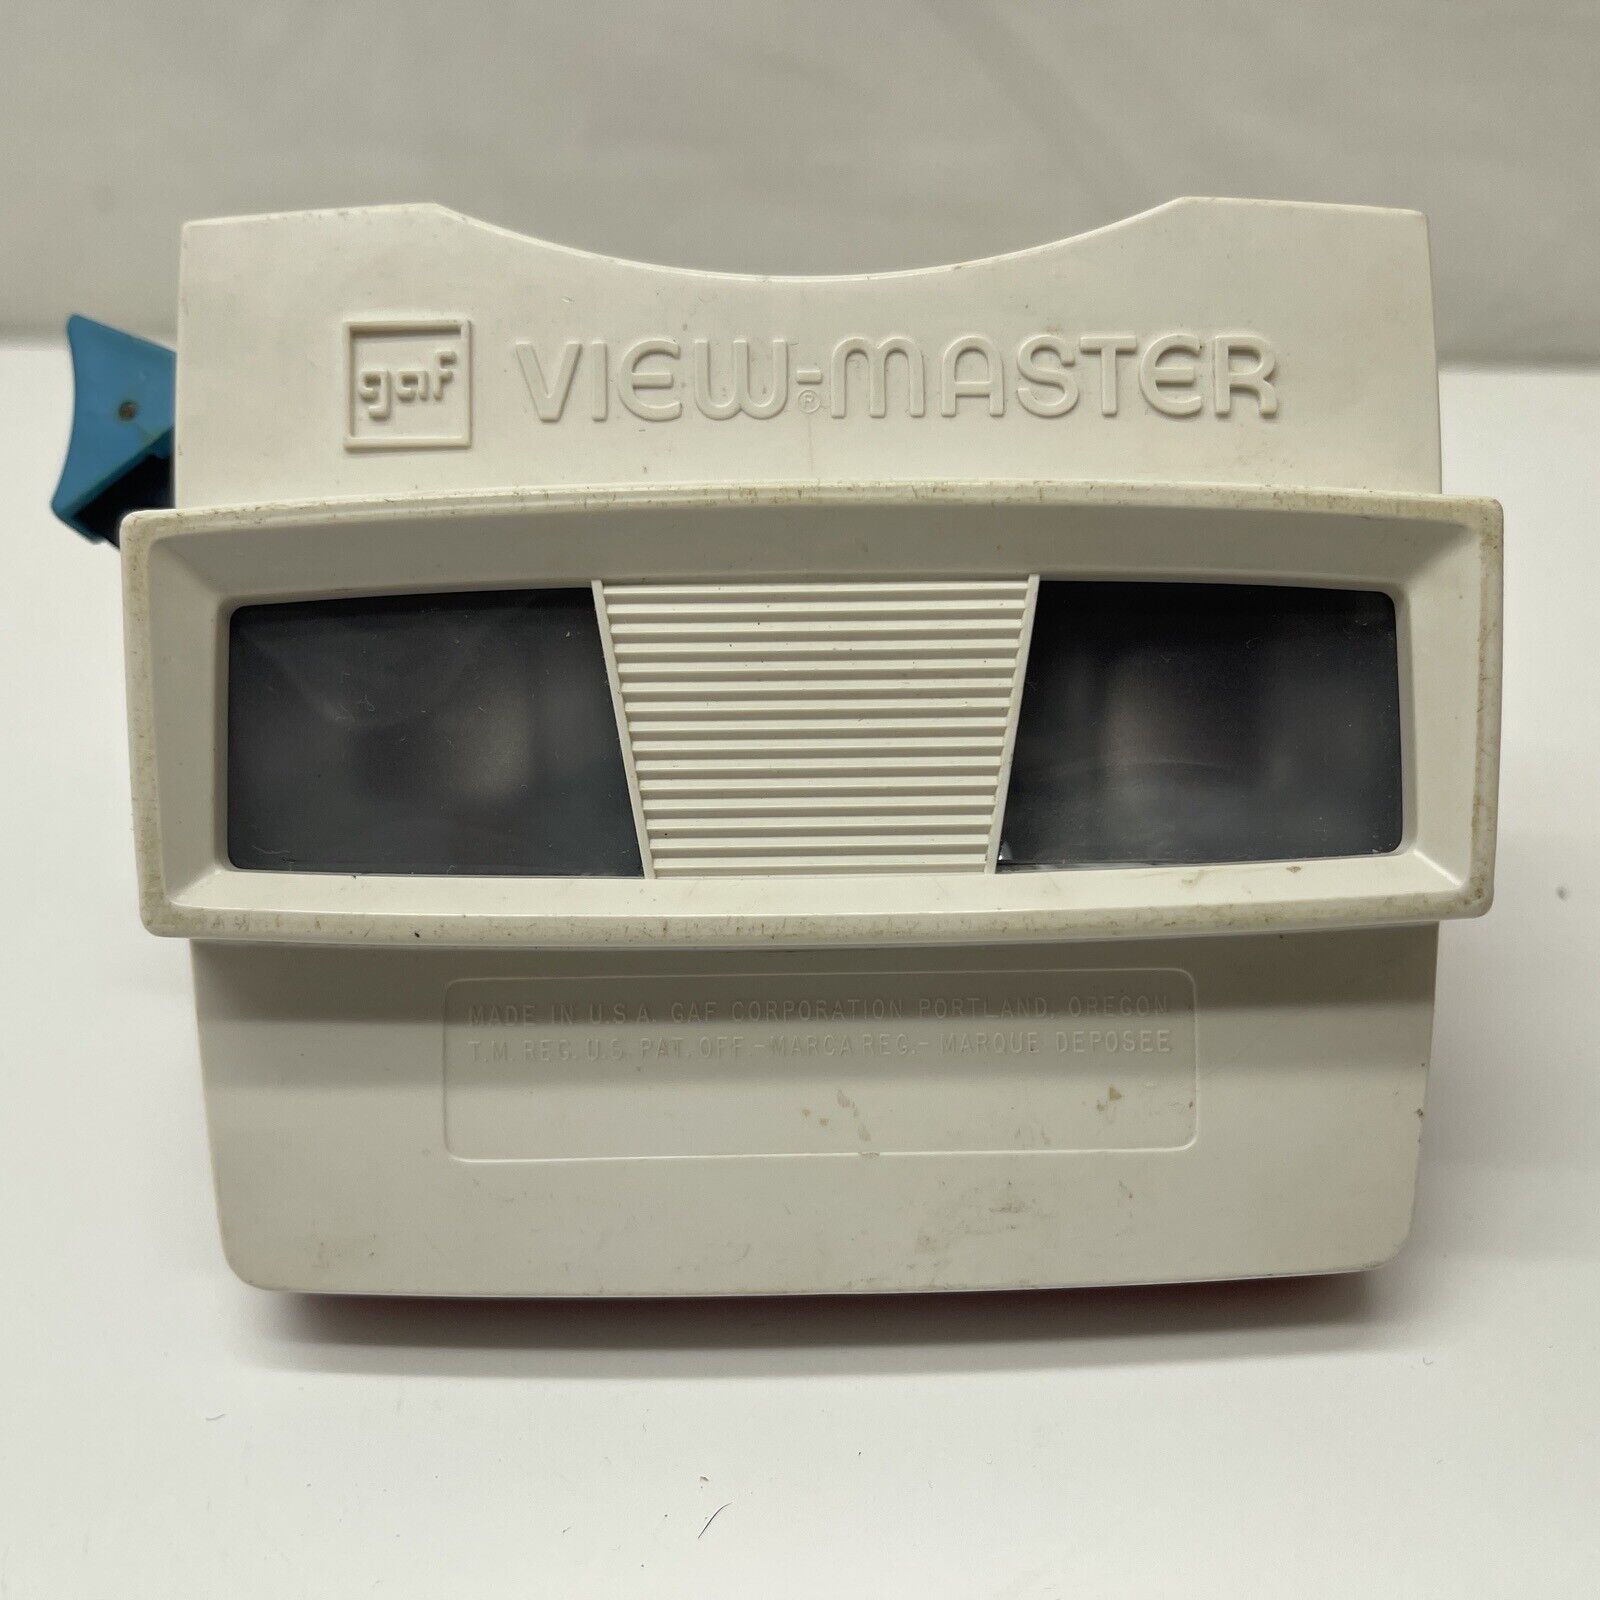  VINTAGE GAF VIEW-MASTER RED, WHITE & BLUE MADE IN THE U.S.A. 1970s TOYS 